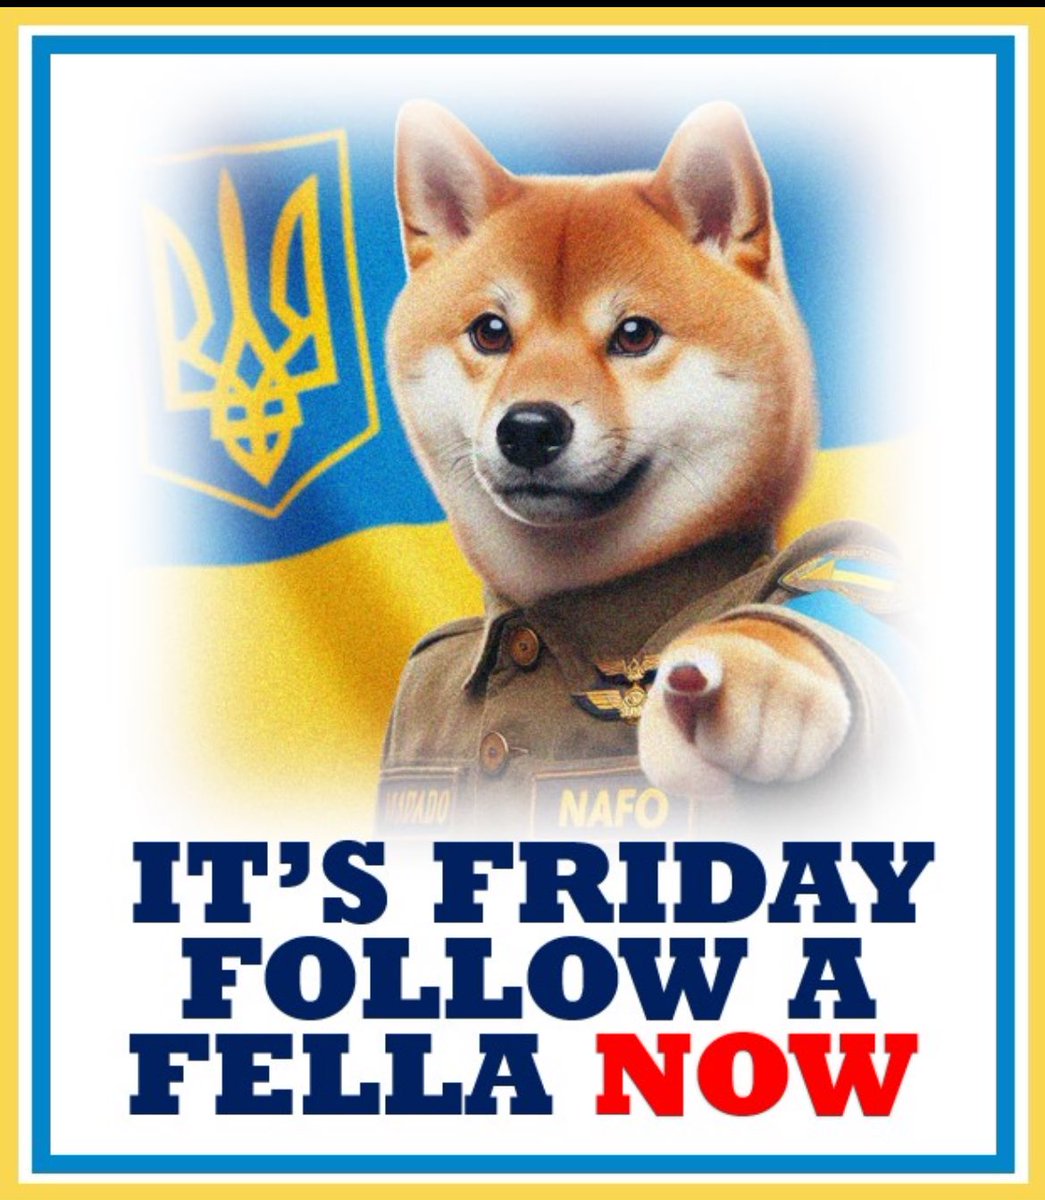 Because it's every #Fellas favorite day Follow A Fella Friday... I have an idea on how to unite NAFO. 1) Retweet this post 2) Reply to this post 3) Go into replies and follow everyone there 4) Bonk Vatniks together. This strategy works really well, let's try it out! #FFF